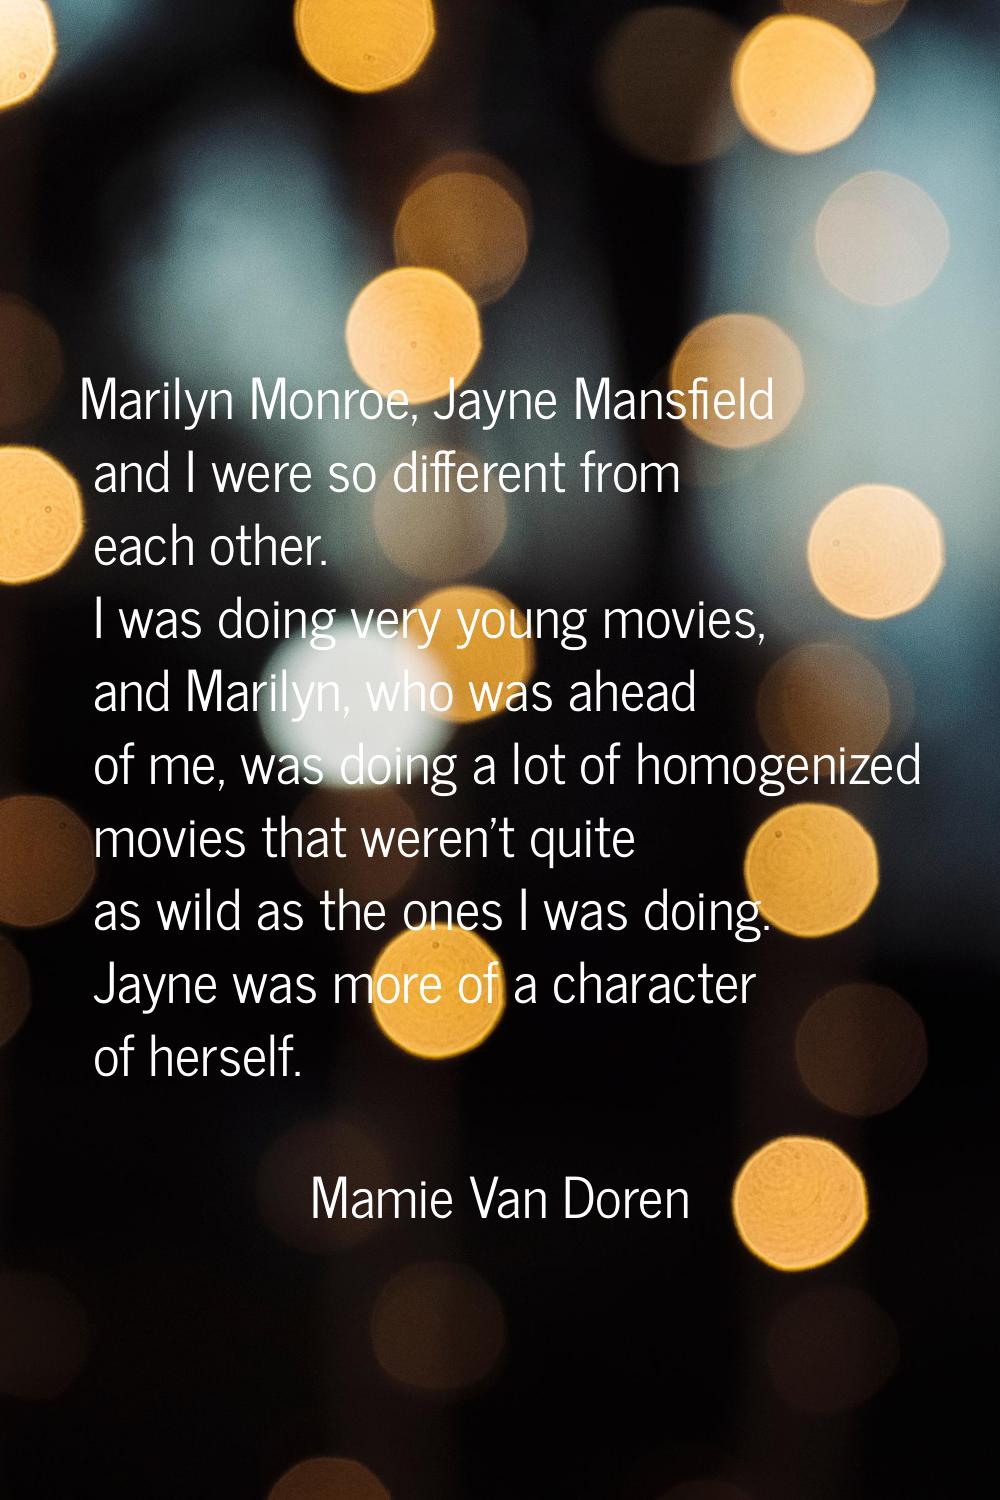 Marilyn Monroe, Jayne Mansfield and I were so different from each other. I was doing very young mov